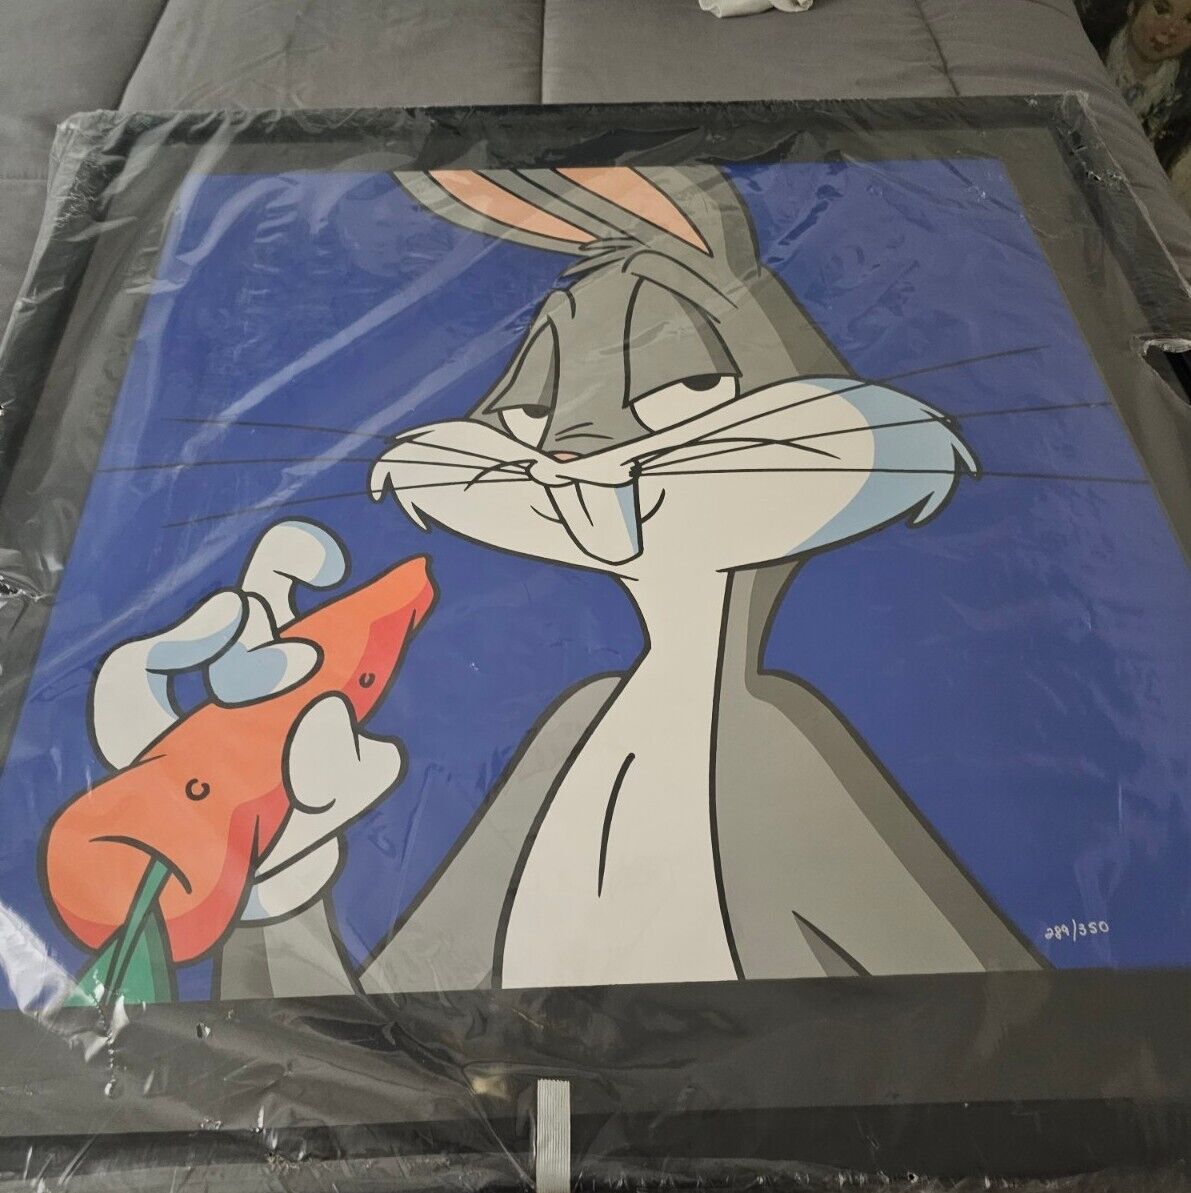 Warner Bros. 1996 Lightgrahic-Bugs Bunny-With Cert. of Authencity & Numbered 